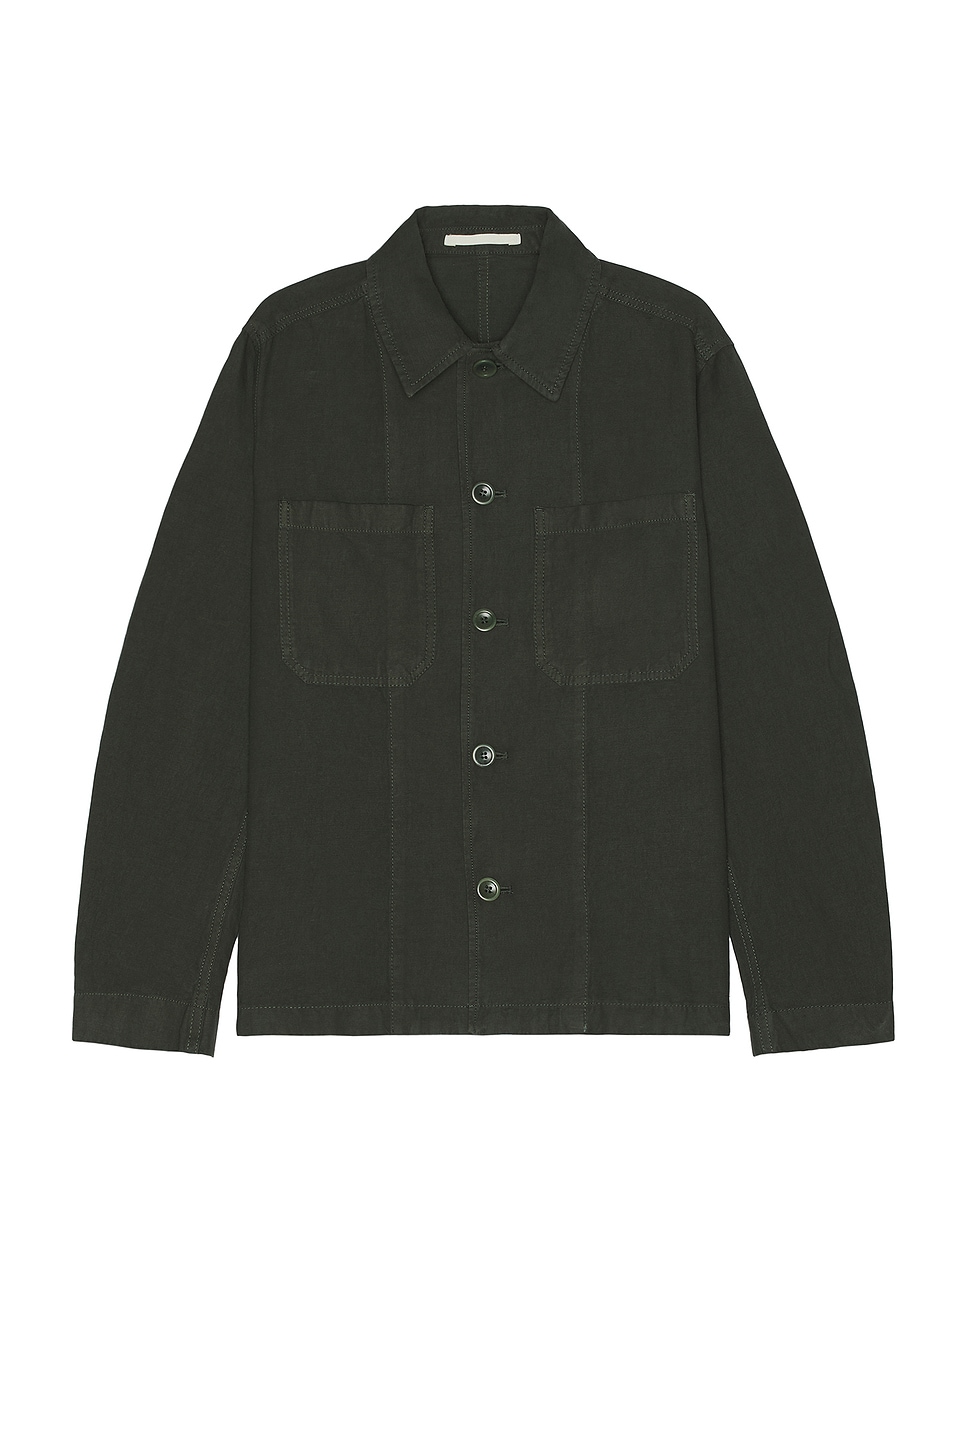 Image 1 of Norse Projects Tyge Cotton Linen Overshirt in Spruce Green